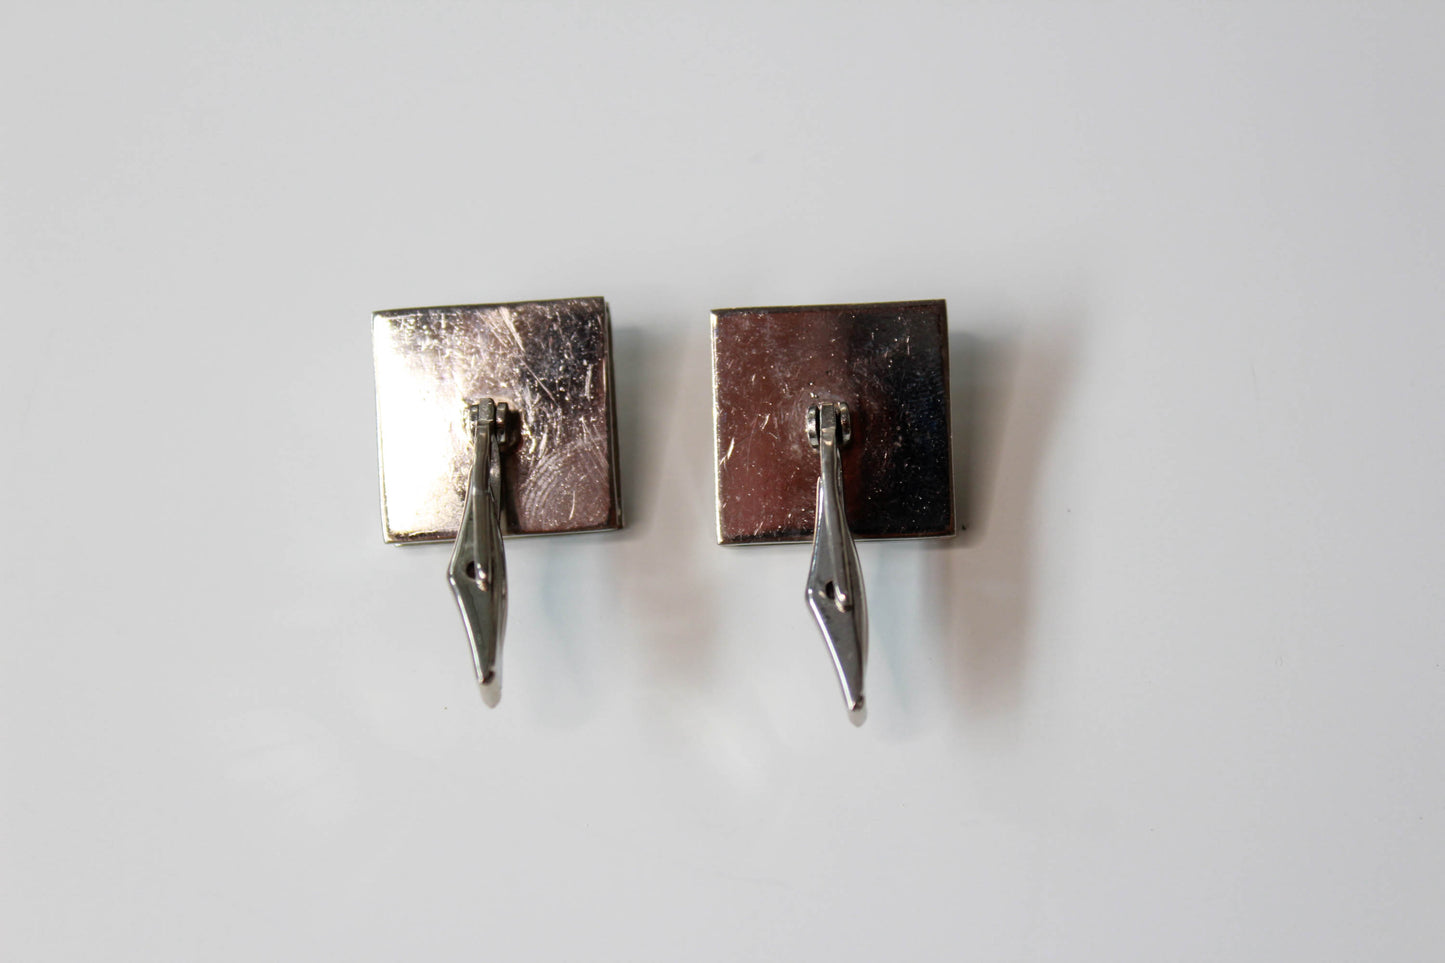 1960s silver square cufflinks with grey sphere at centre, raised framed edge, vintage gift for men